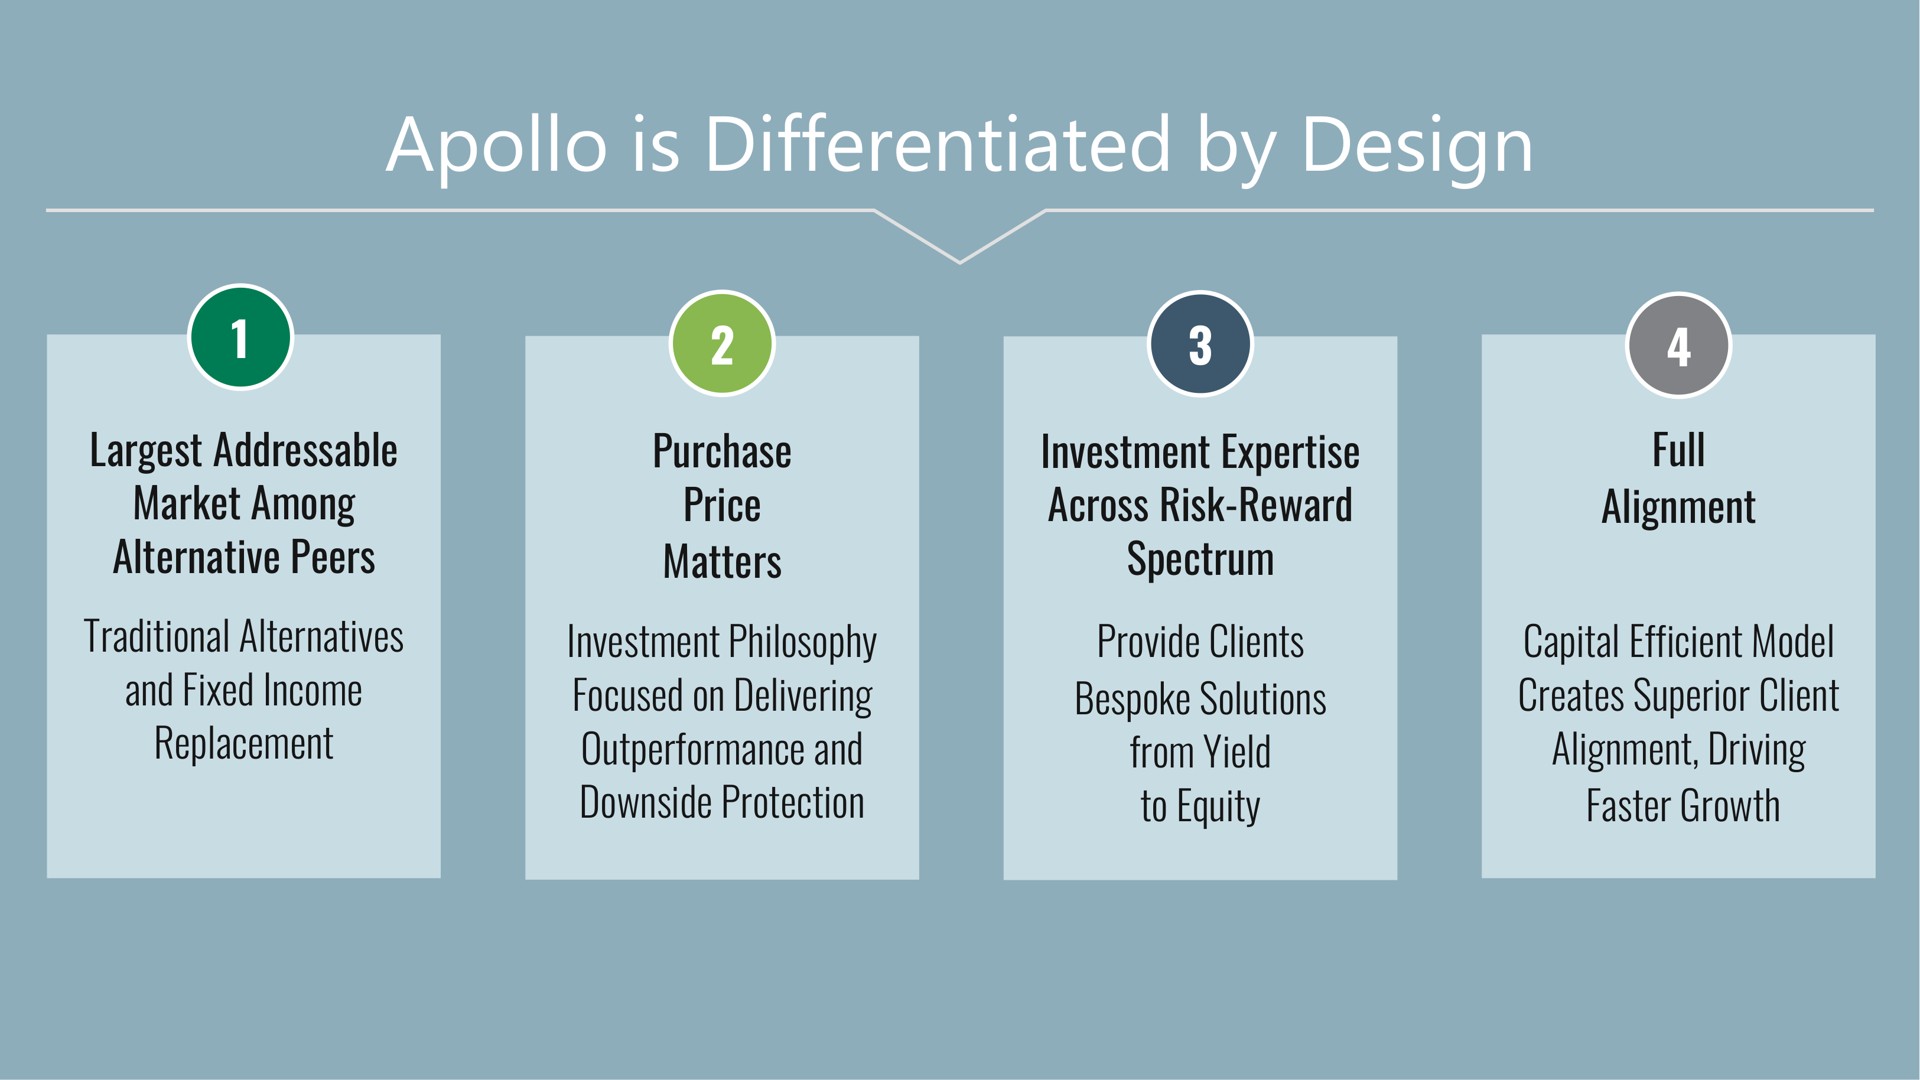 is differentiated by design market among alternative peers traditional alternatives and fixed income replacement purchase price matters investment philosophy focused on delivering and downside protection investment across risk reward spectrum provide clients bespoke solutions from yield to equity full alignment capital efficient model creates superior client alignment driving faster growth | Apollo Global Management